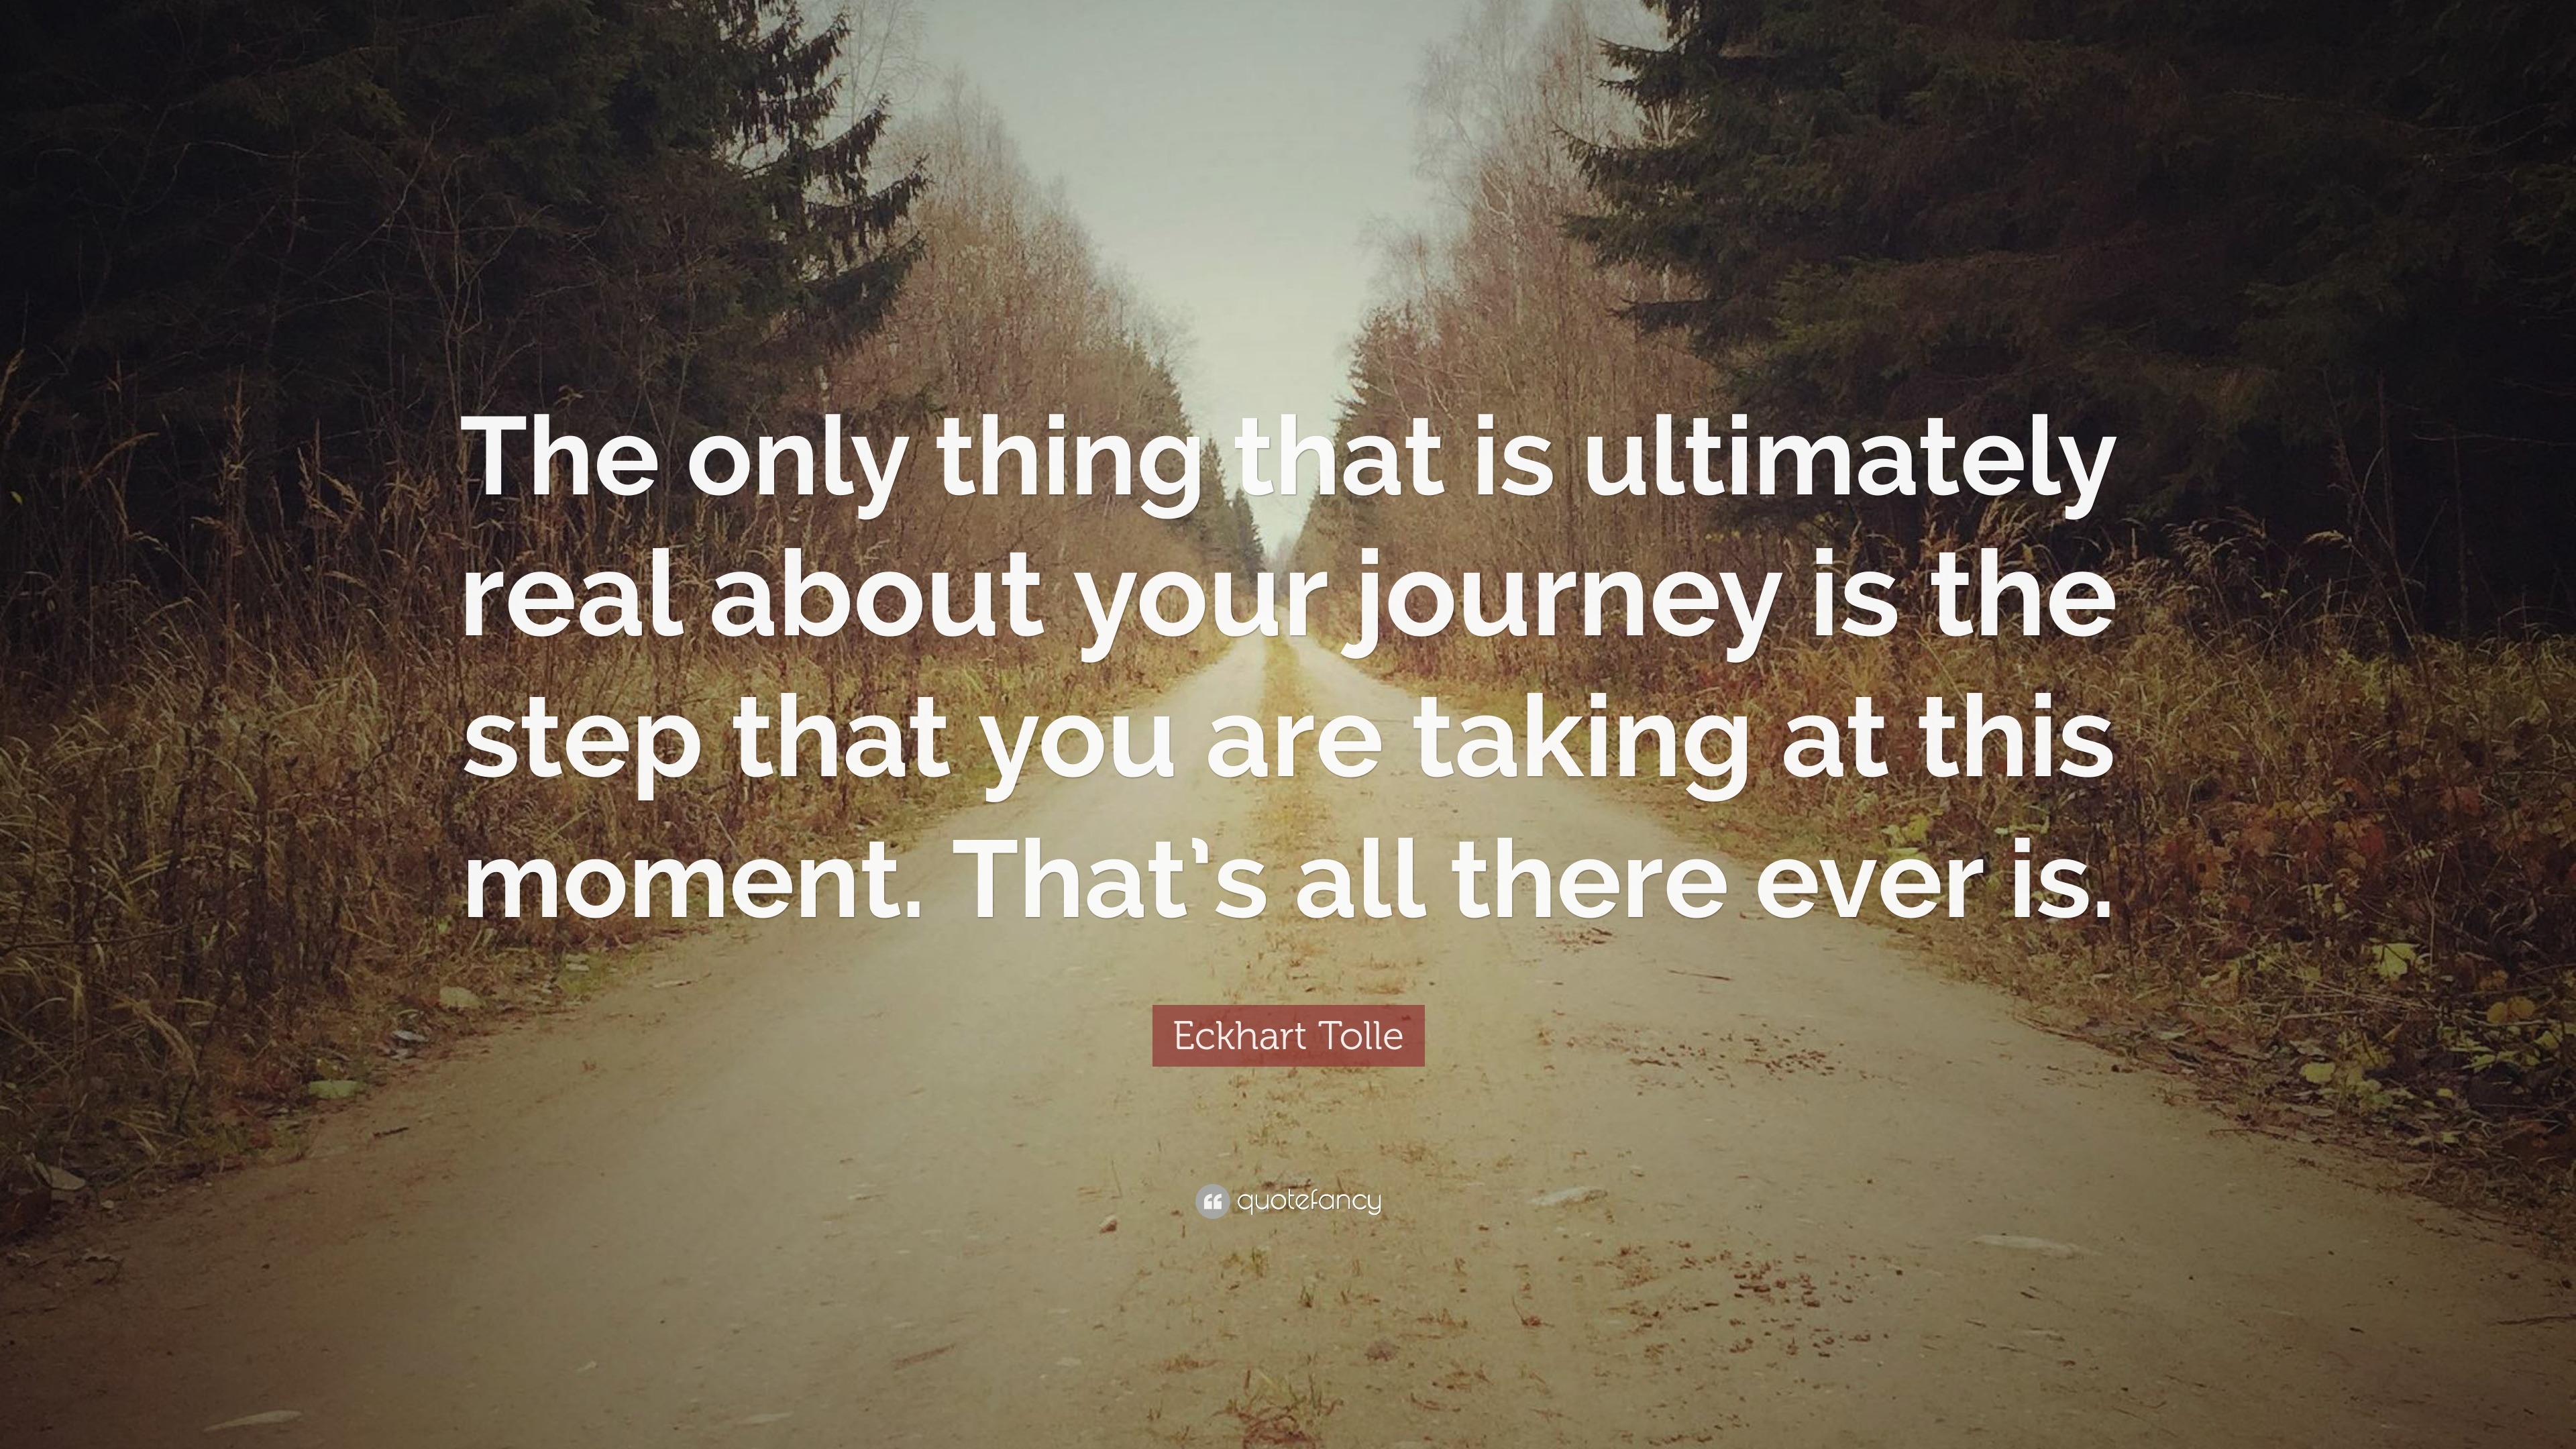 Eckhart Tolle Quote: “The only thing that is ultimately real about your